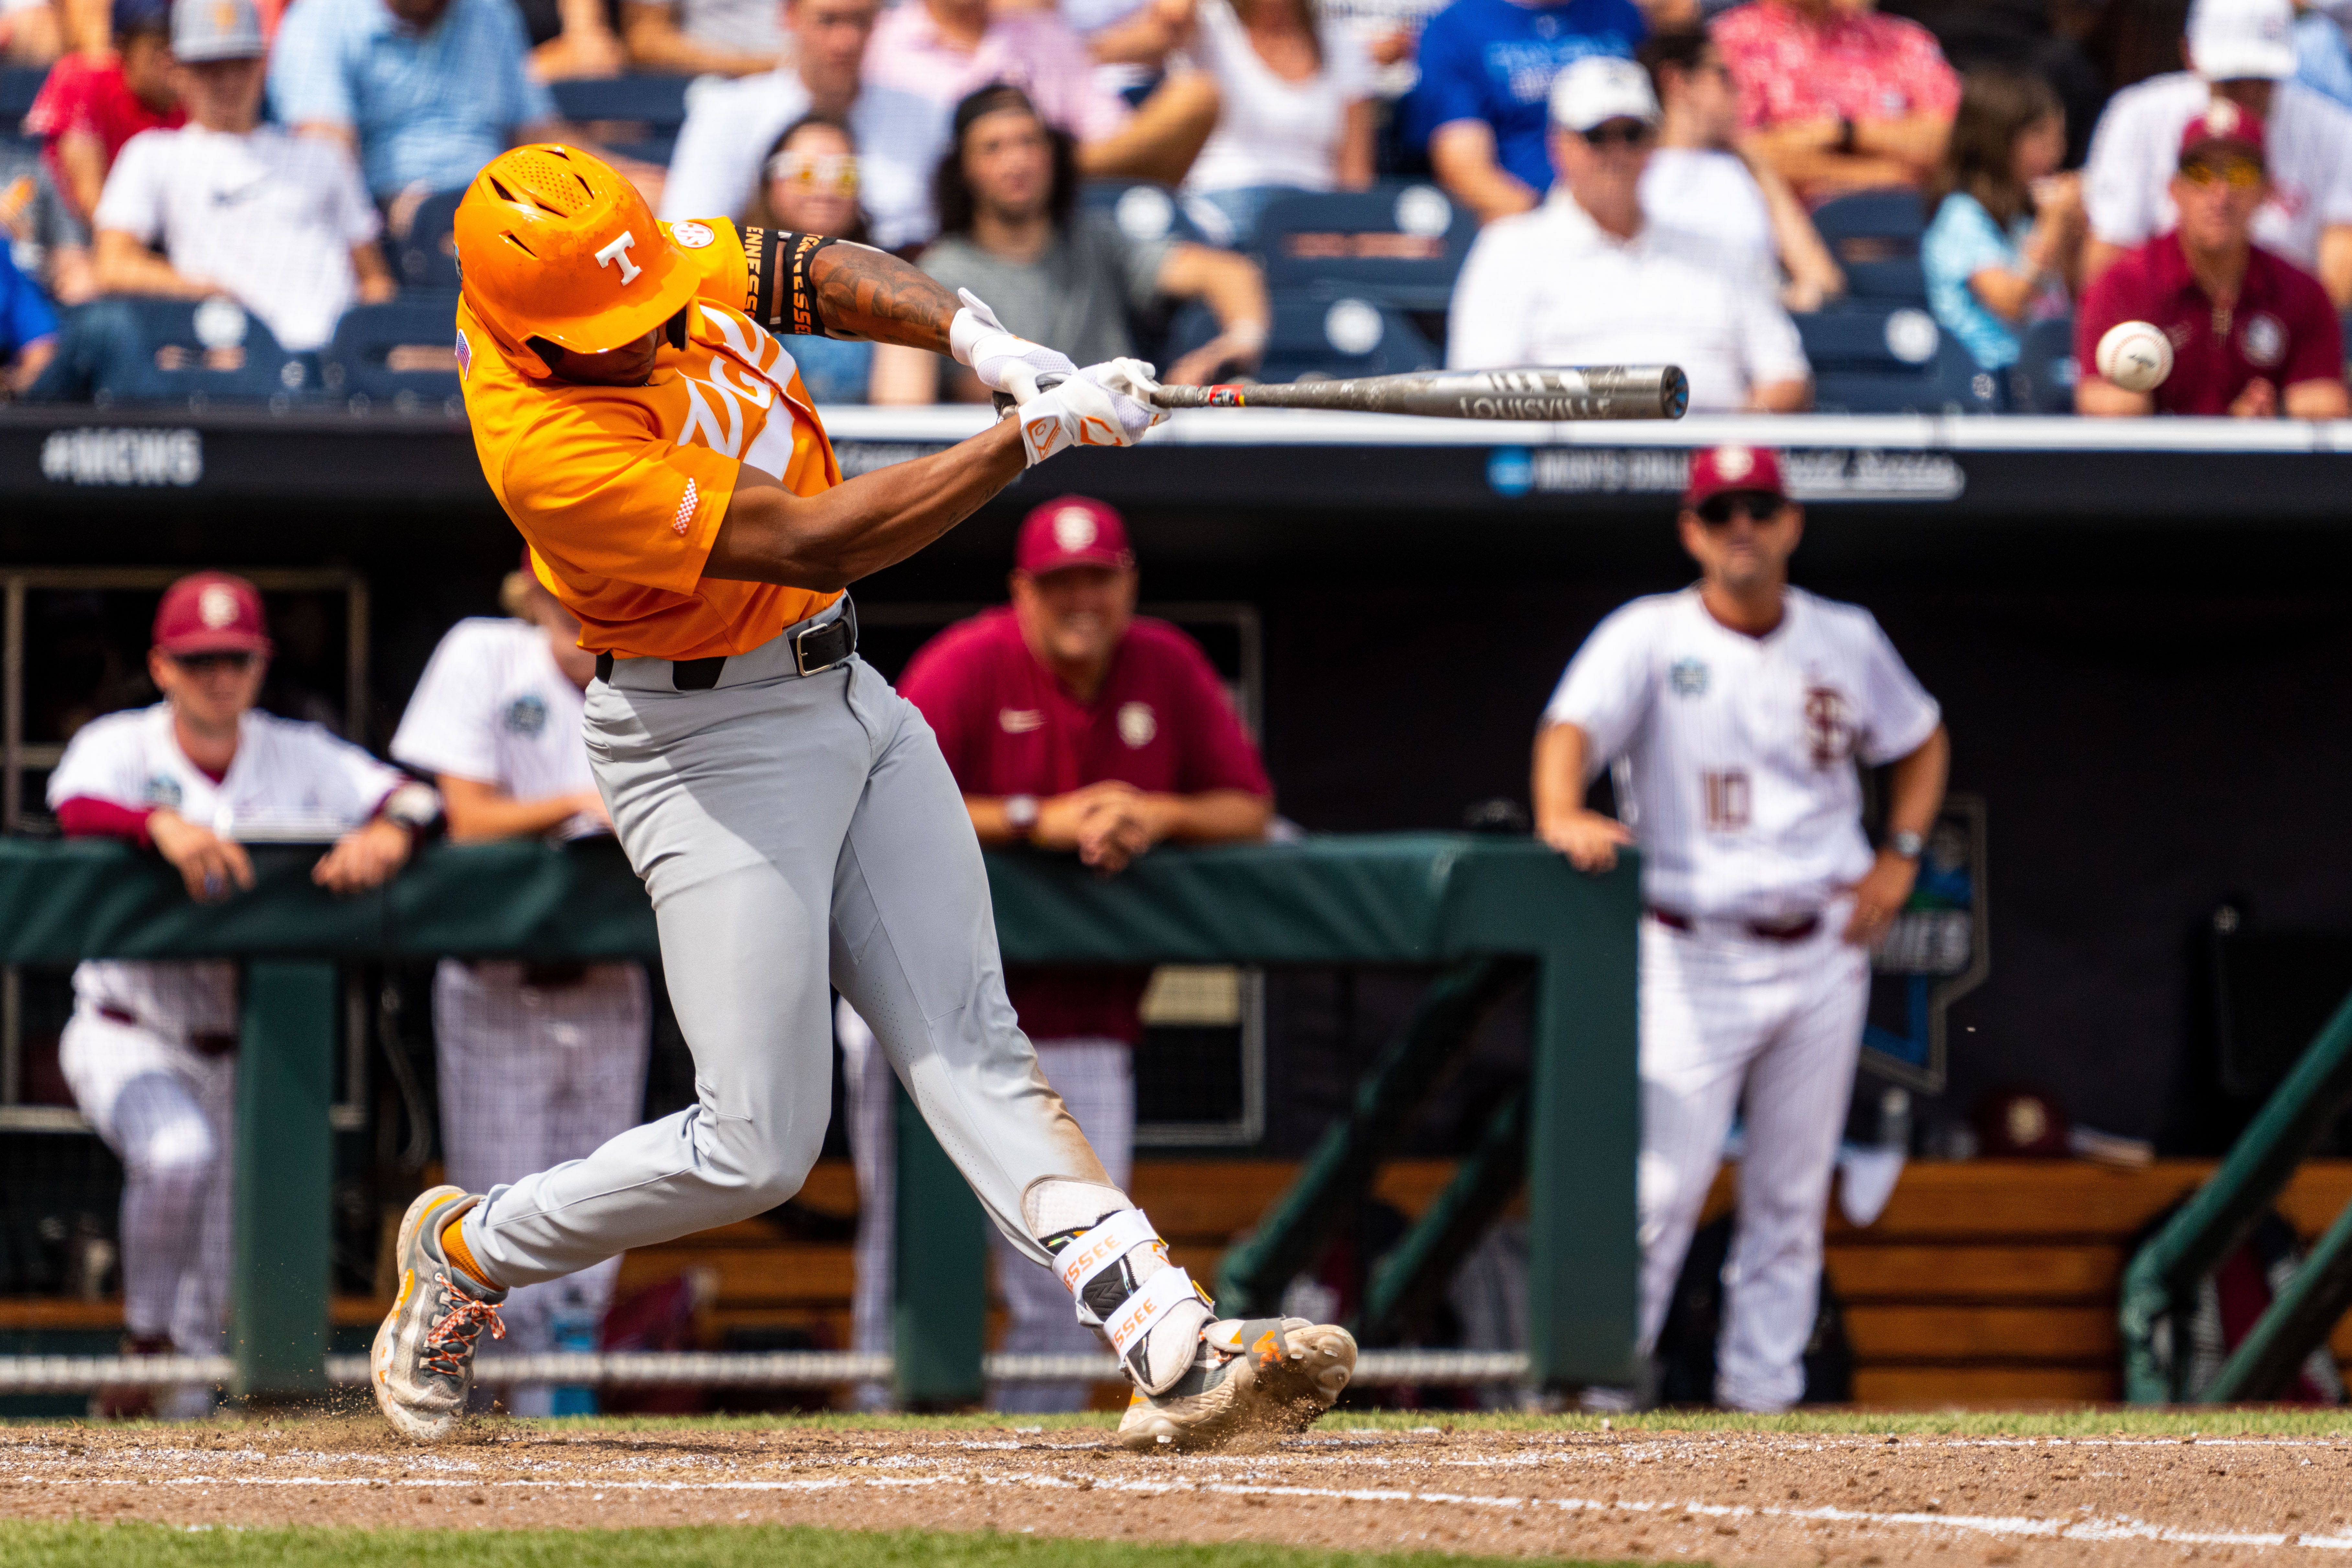 Christian Moore leads Tennessee in home runs this season with 33 round-trippers. Billy Amick is far second with 23 HRs.